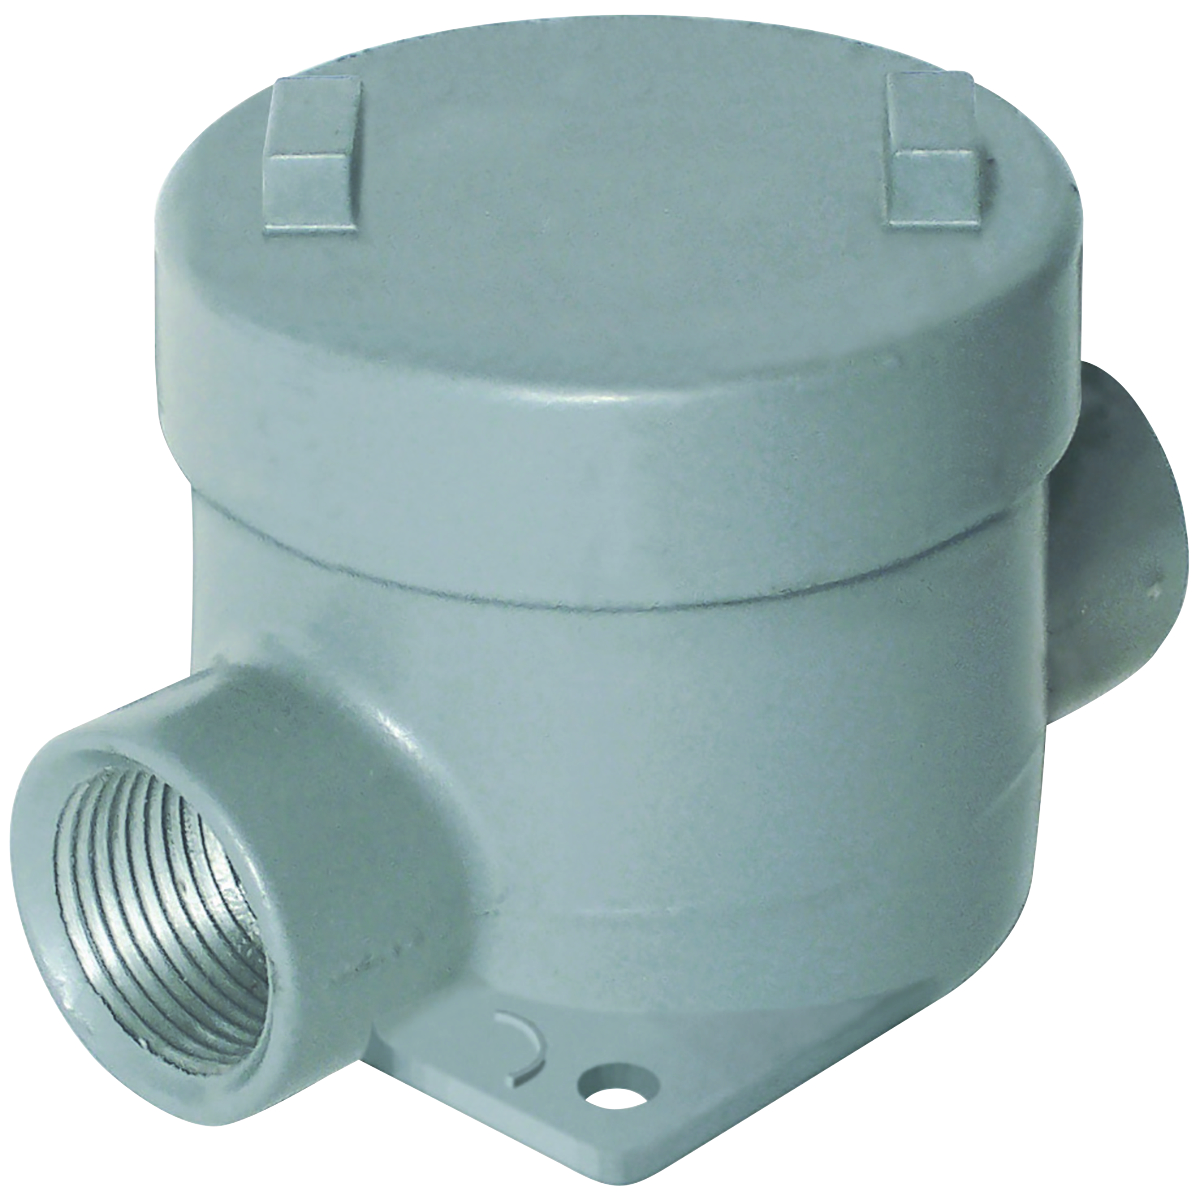 GEB SERIES - ALUMINUM OUTLET BODY - C TYPE - HUB SIZE 1 INCH - VOLUME29.0 CUBIC INCHES